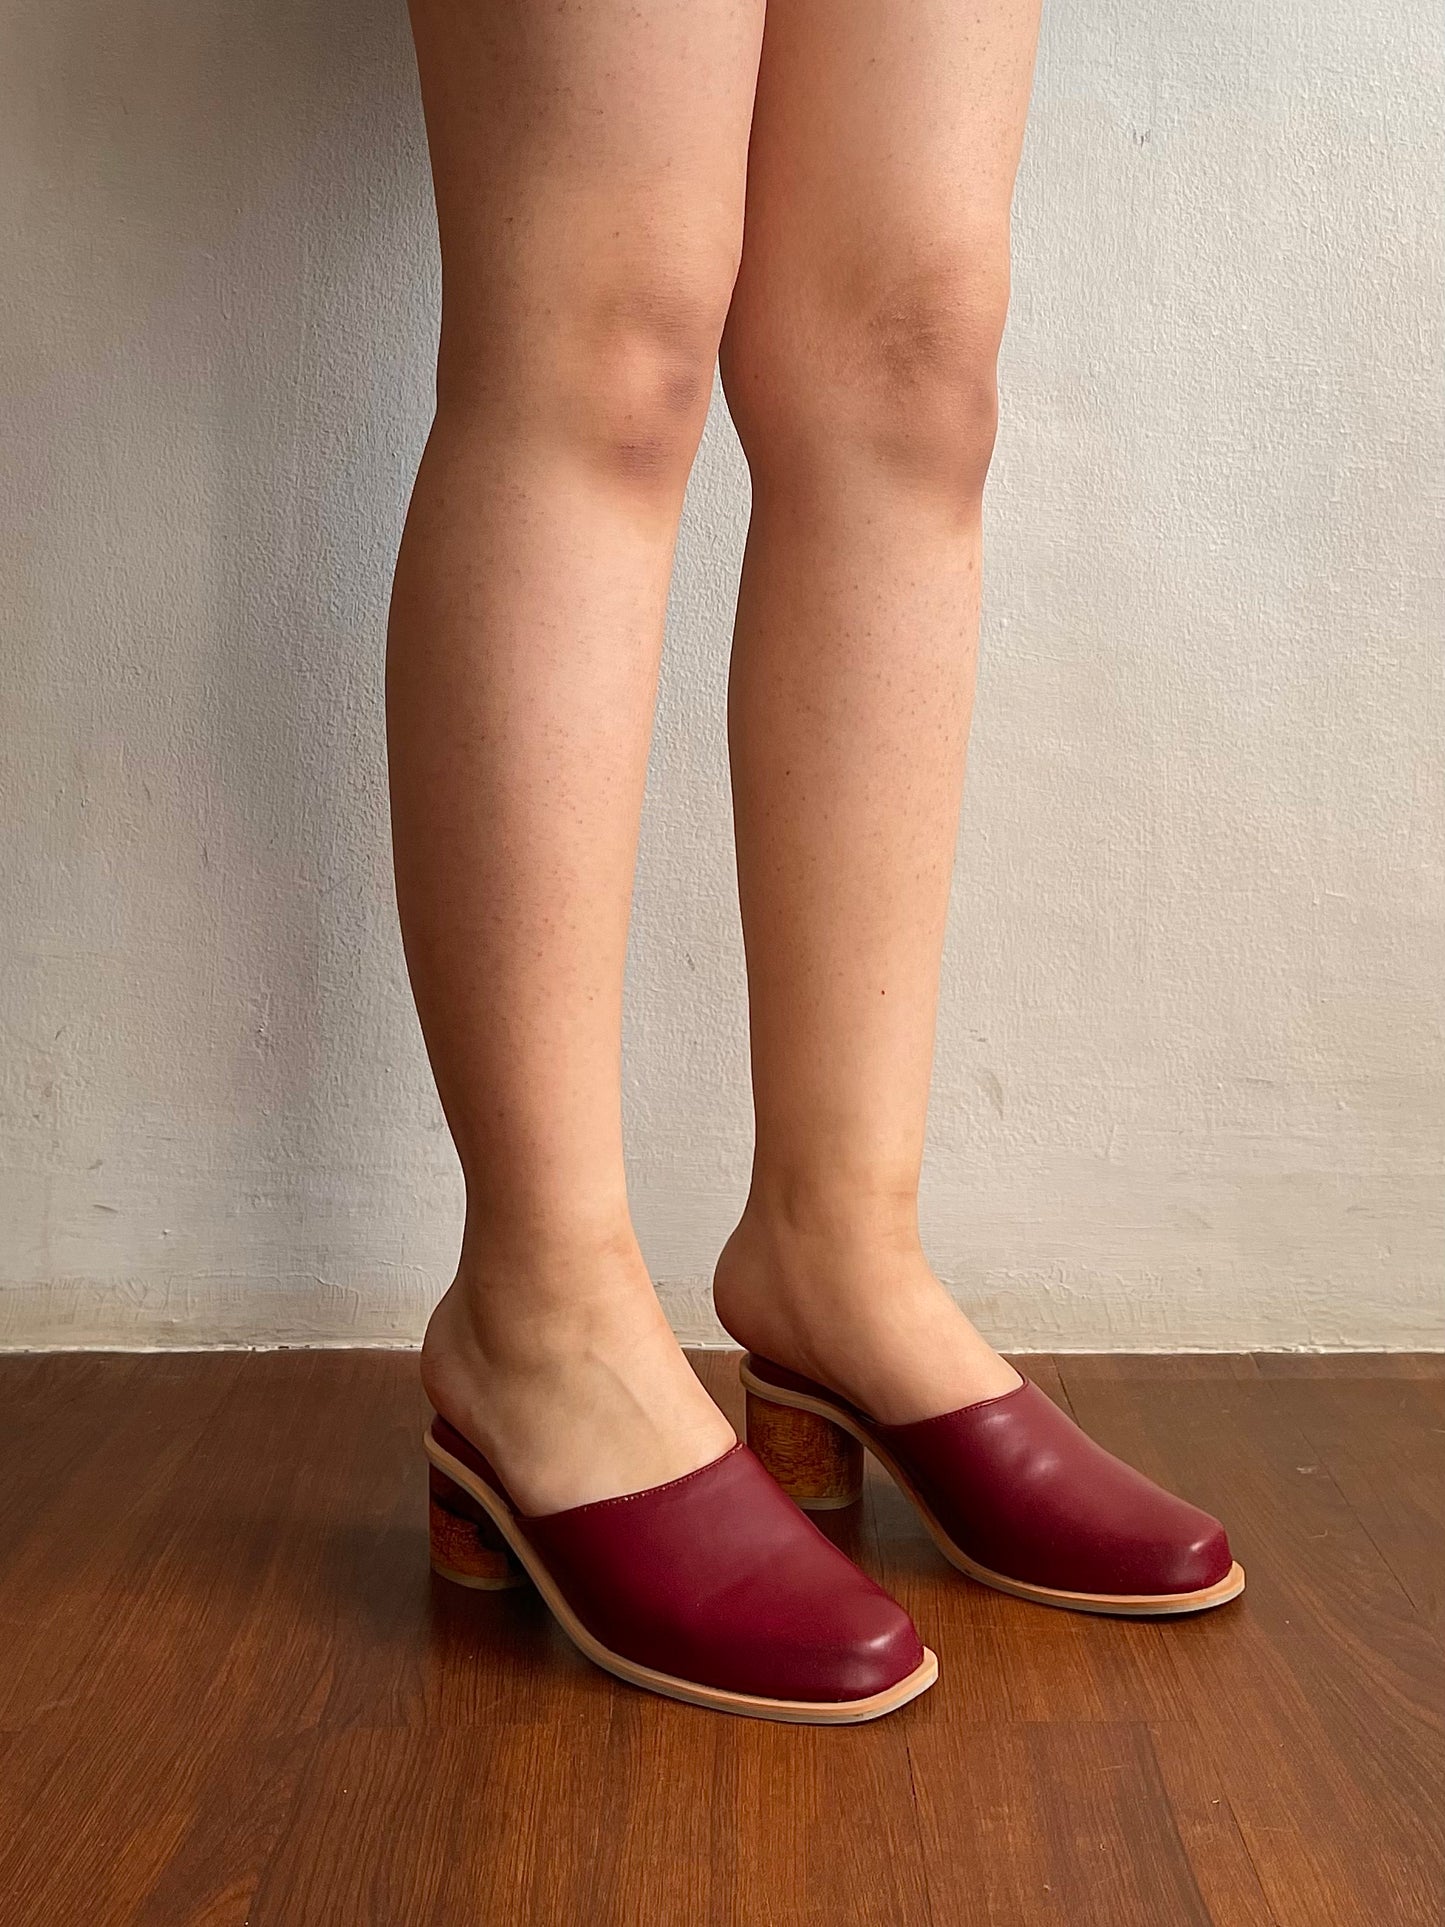 Sample 021: Mules in Oxblood - Size 5